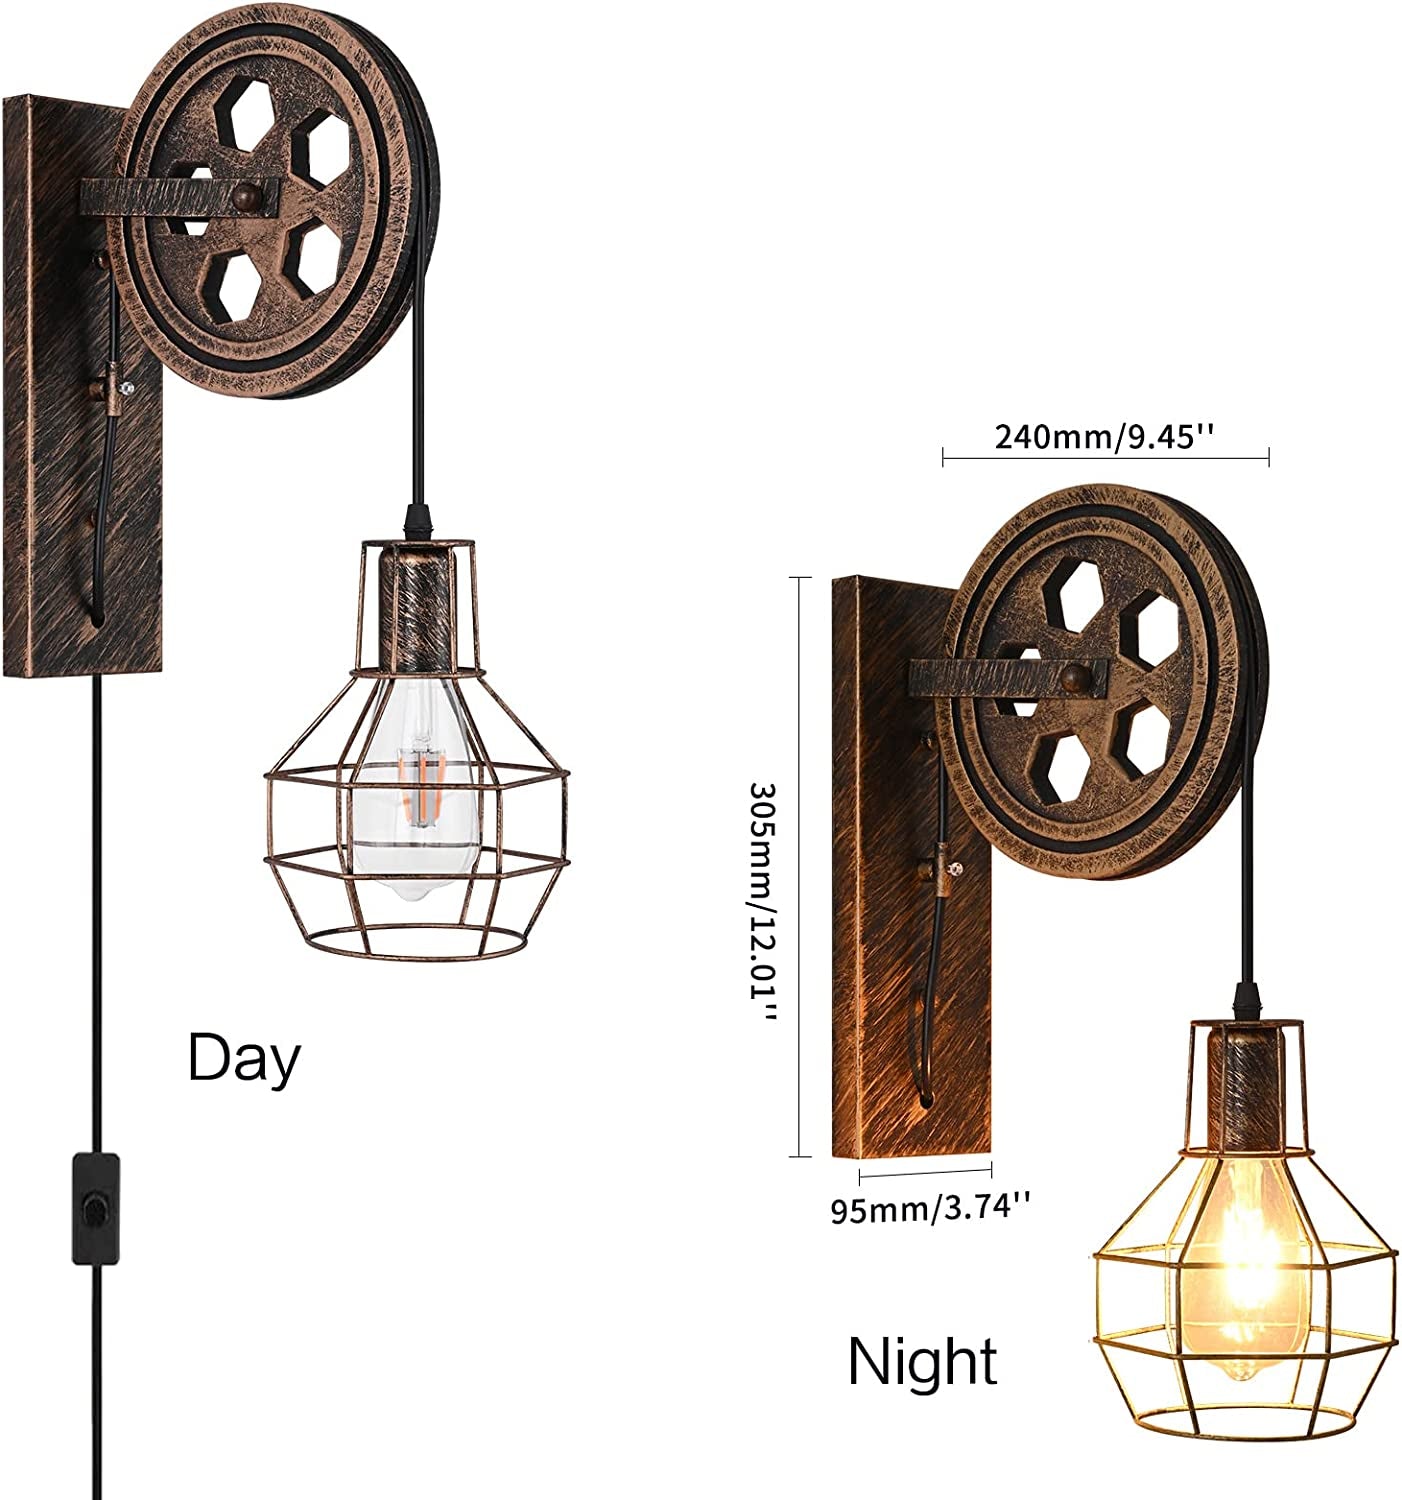 Retro Industrial Wall Sconce, 2Pack Antique Brass Vintage Plug in Wall Lighting, Industrial Lantern Retro Lamp Metal Wall Light Fixtures for Bedside Bedroom Home Dining Room